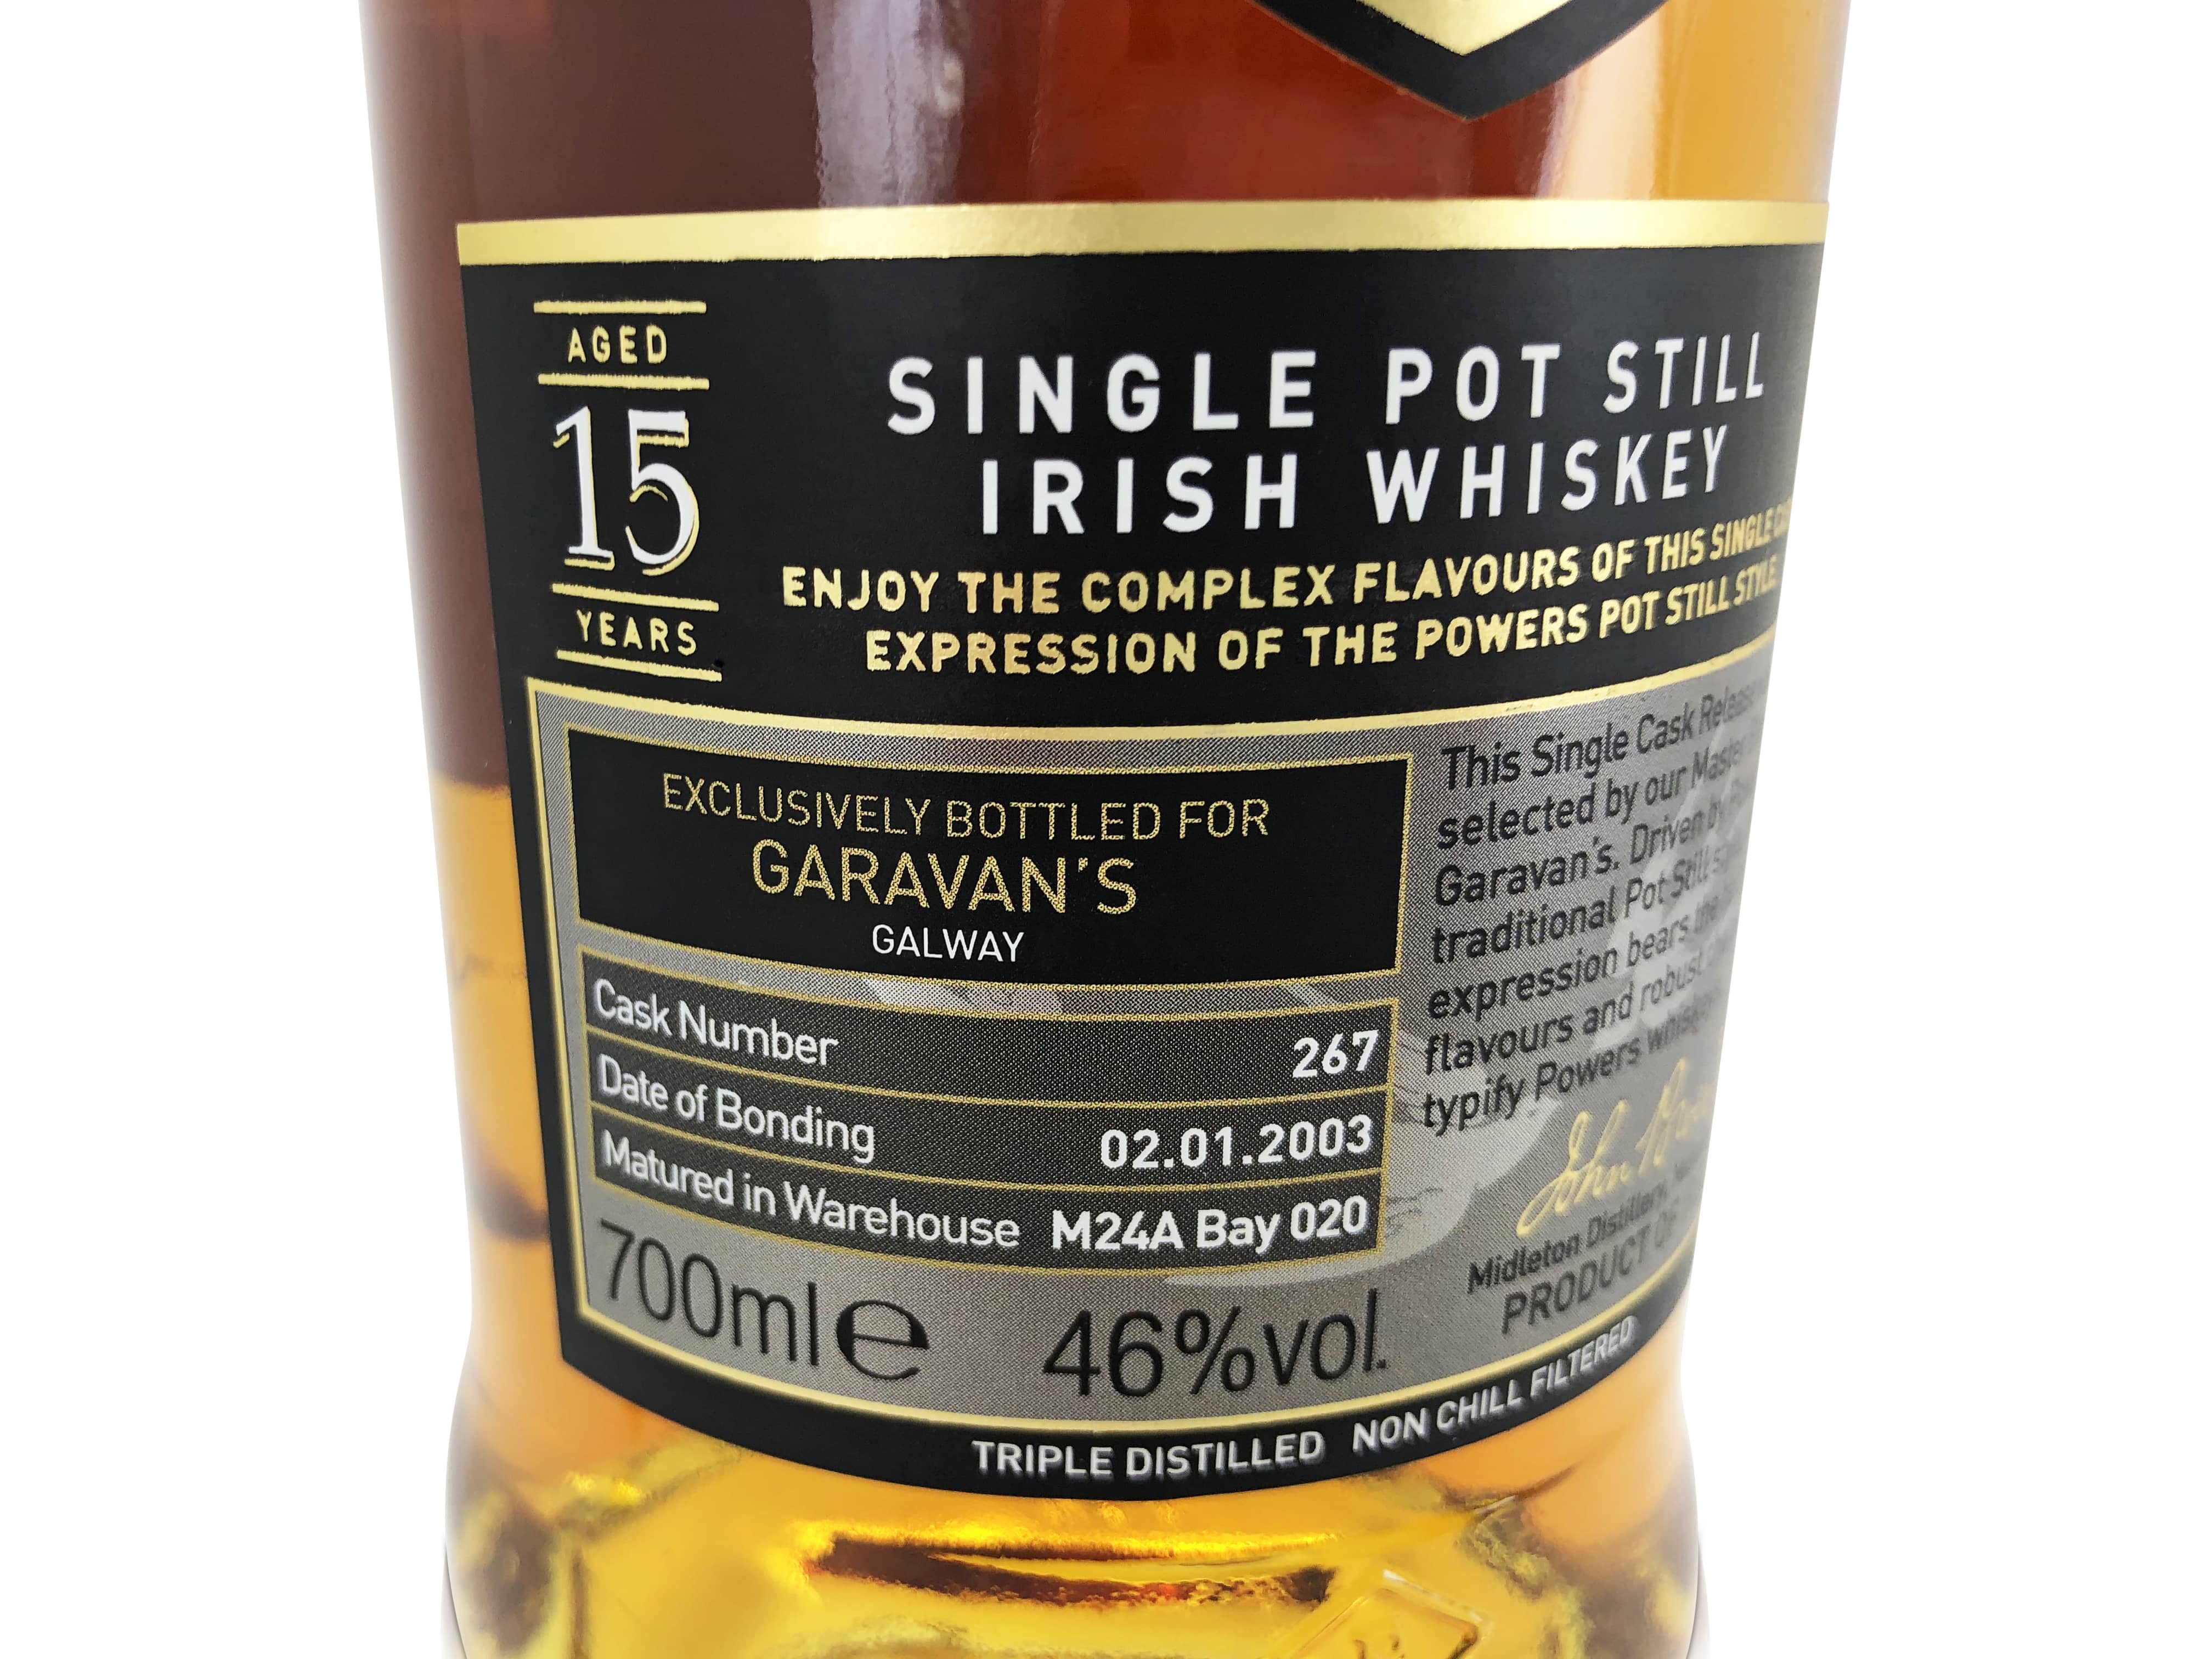 Powers and Garavan's 15-Year-Old Single Malt Irish Whiskey - Limited Edition Collaboration - Only 240 Bottles - Hand-Selected by Powers Master Blender - Exclusively Available at Garavan's Ba